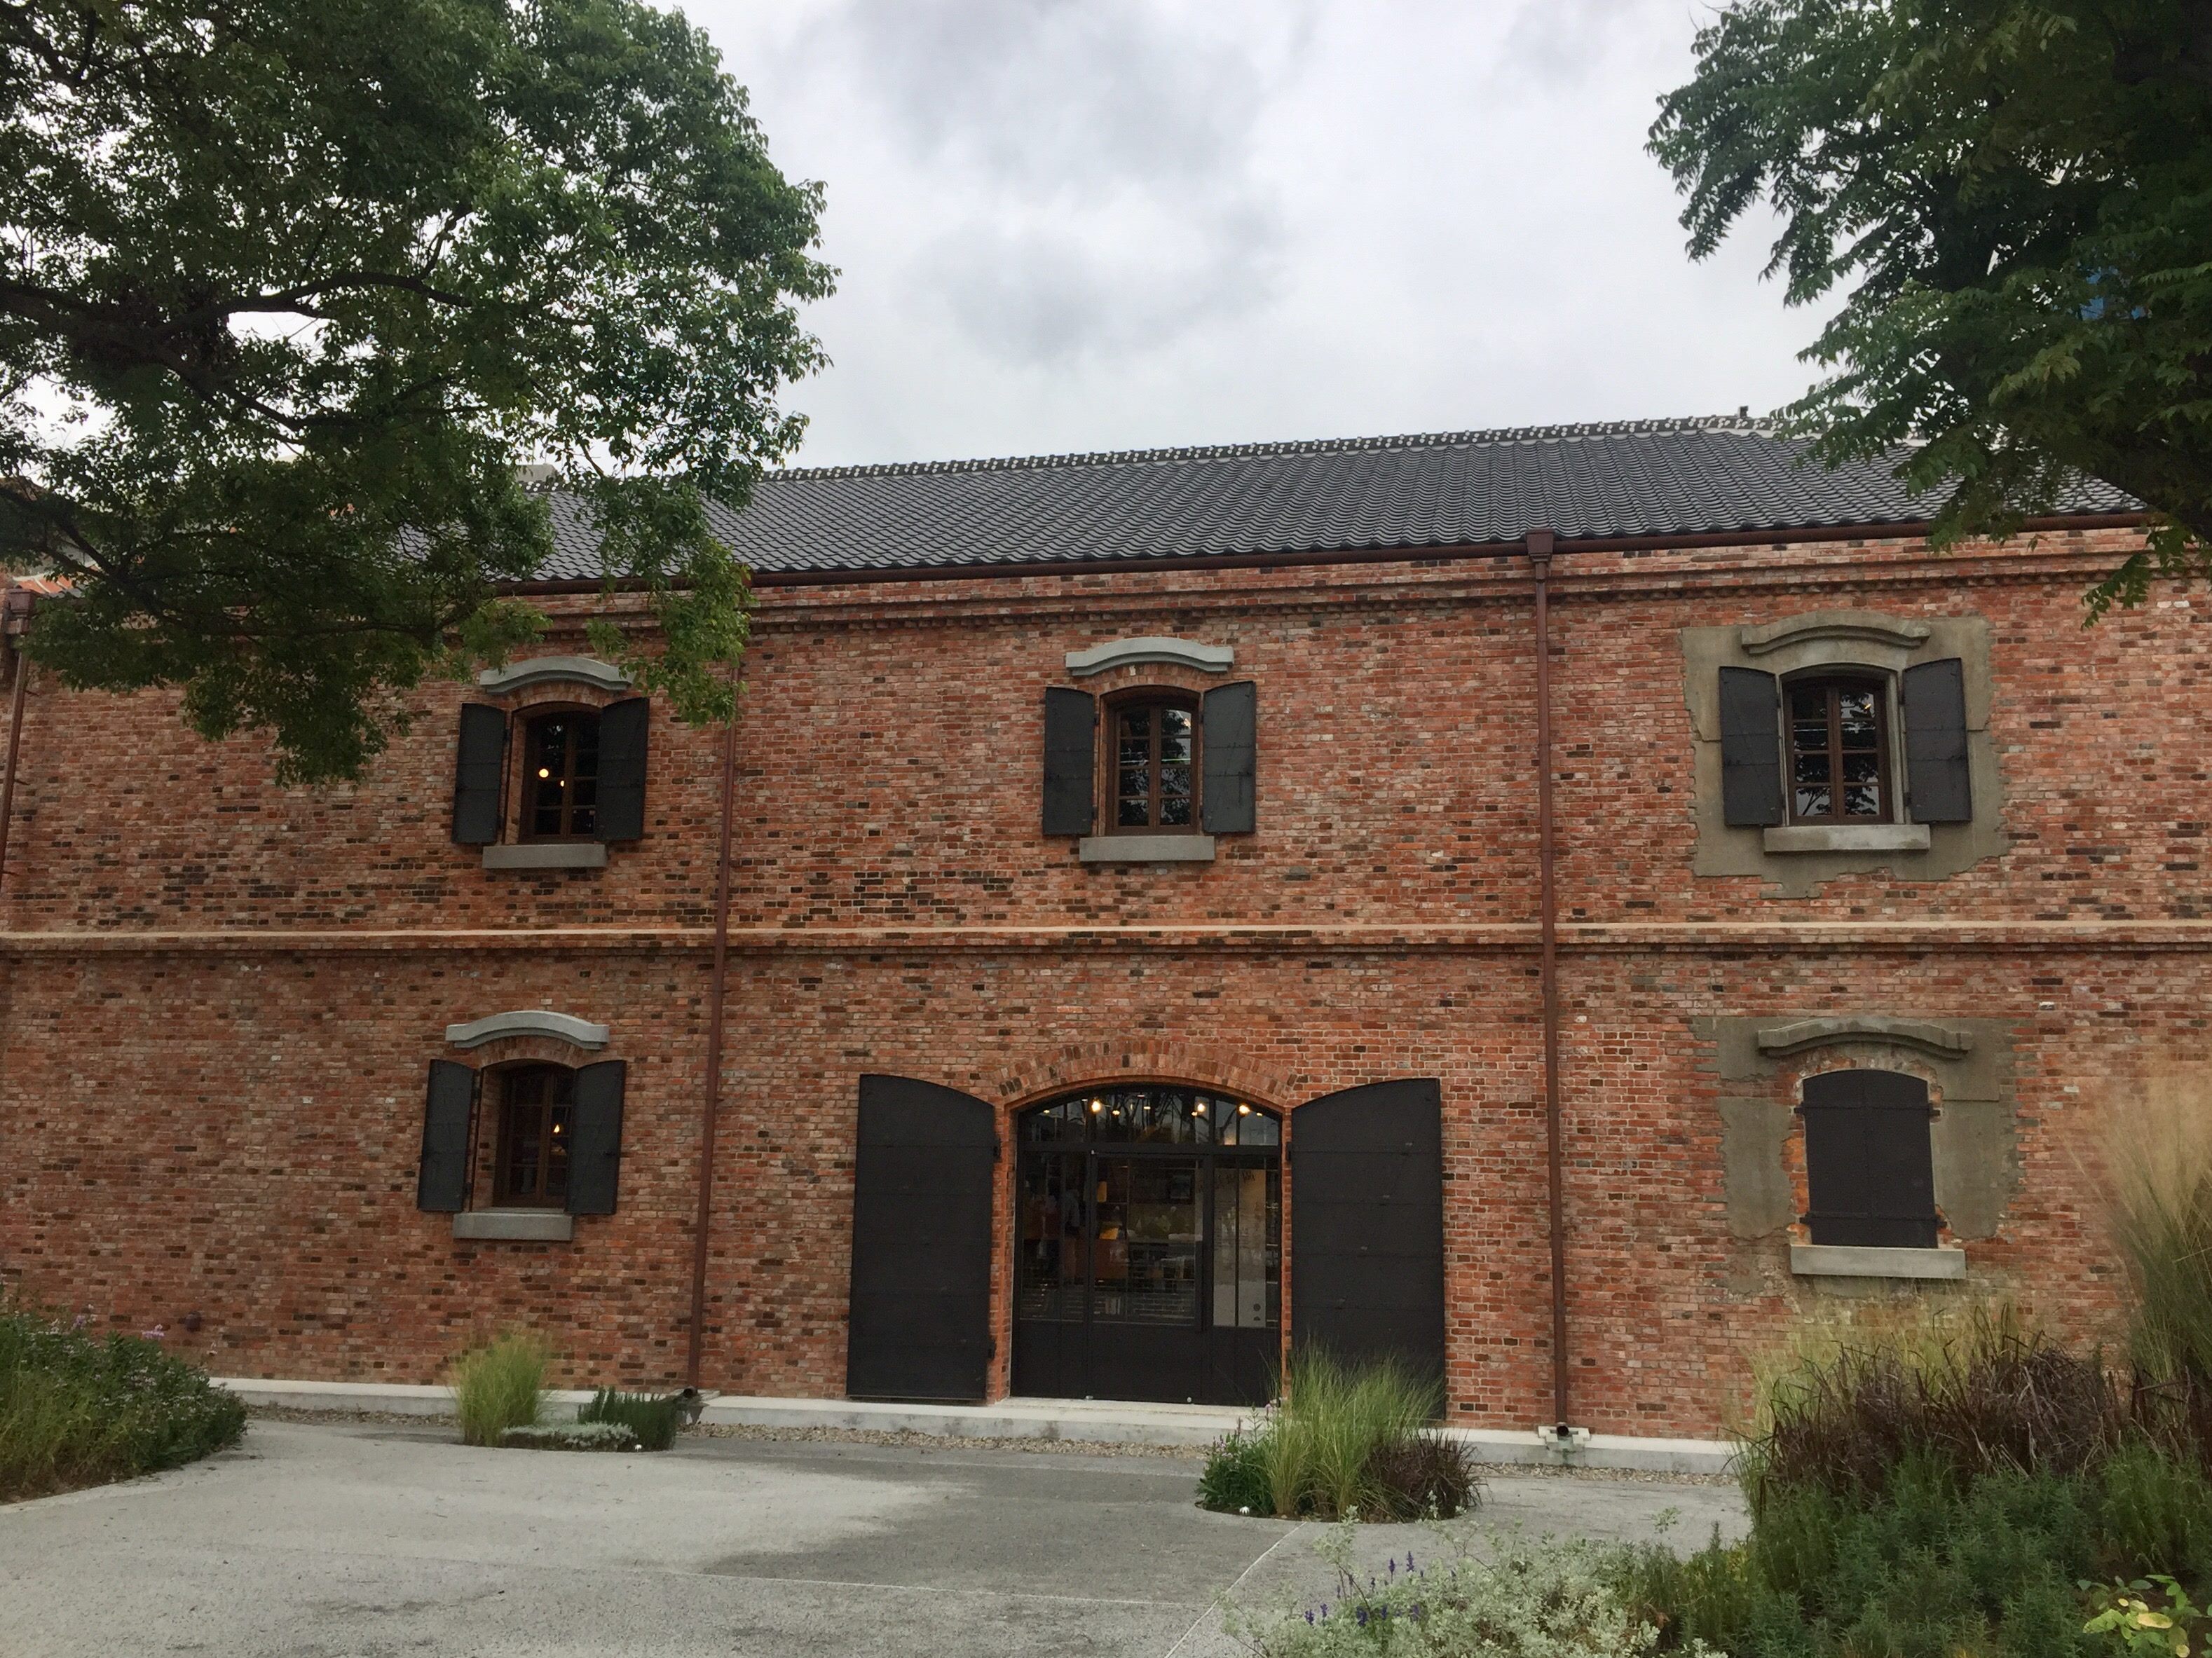 The Mitsui Warehouse in the west of Taipei has now been reopened to the public after two years of relocation, reconstruction and restoration.